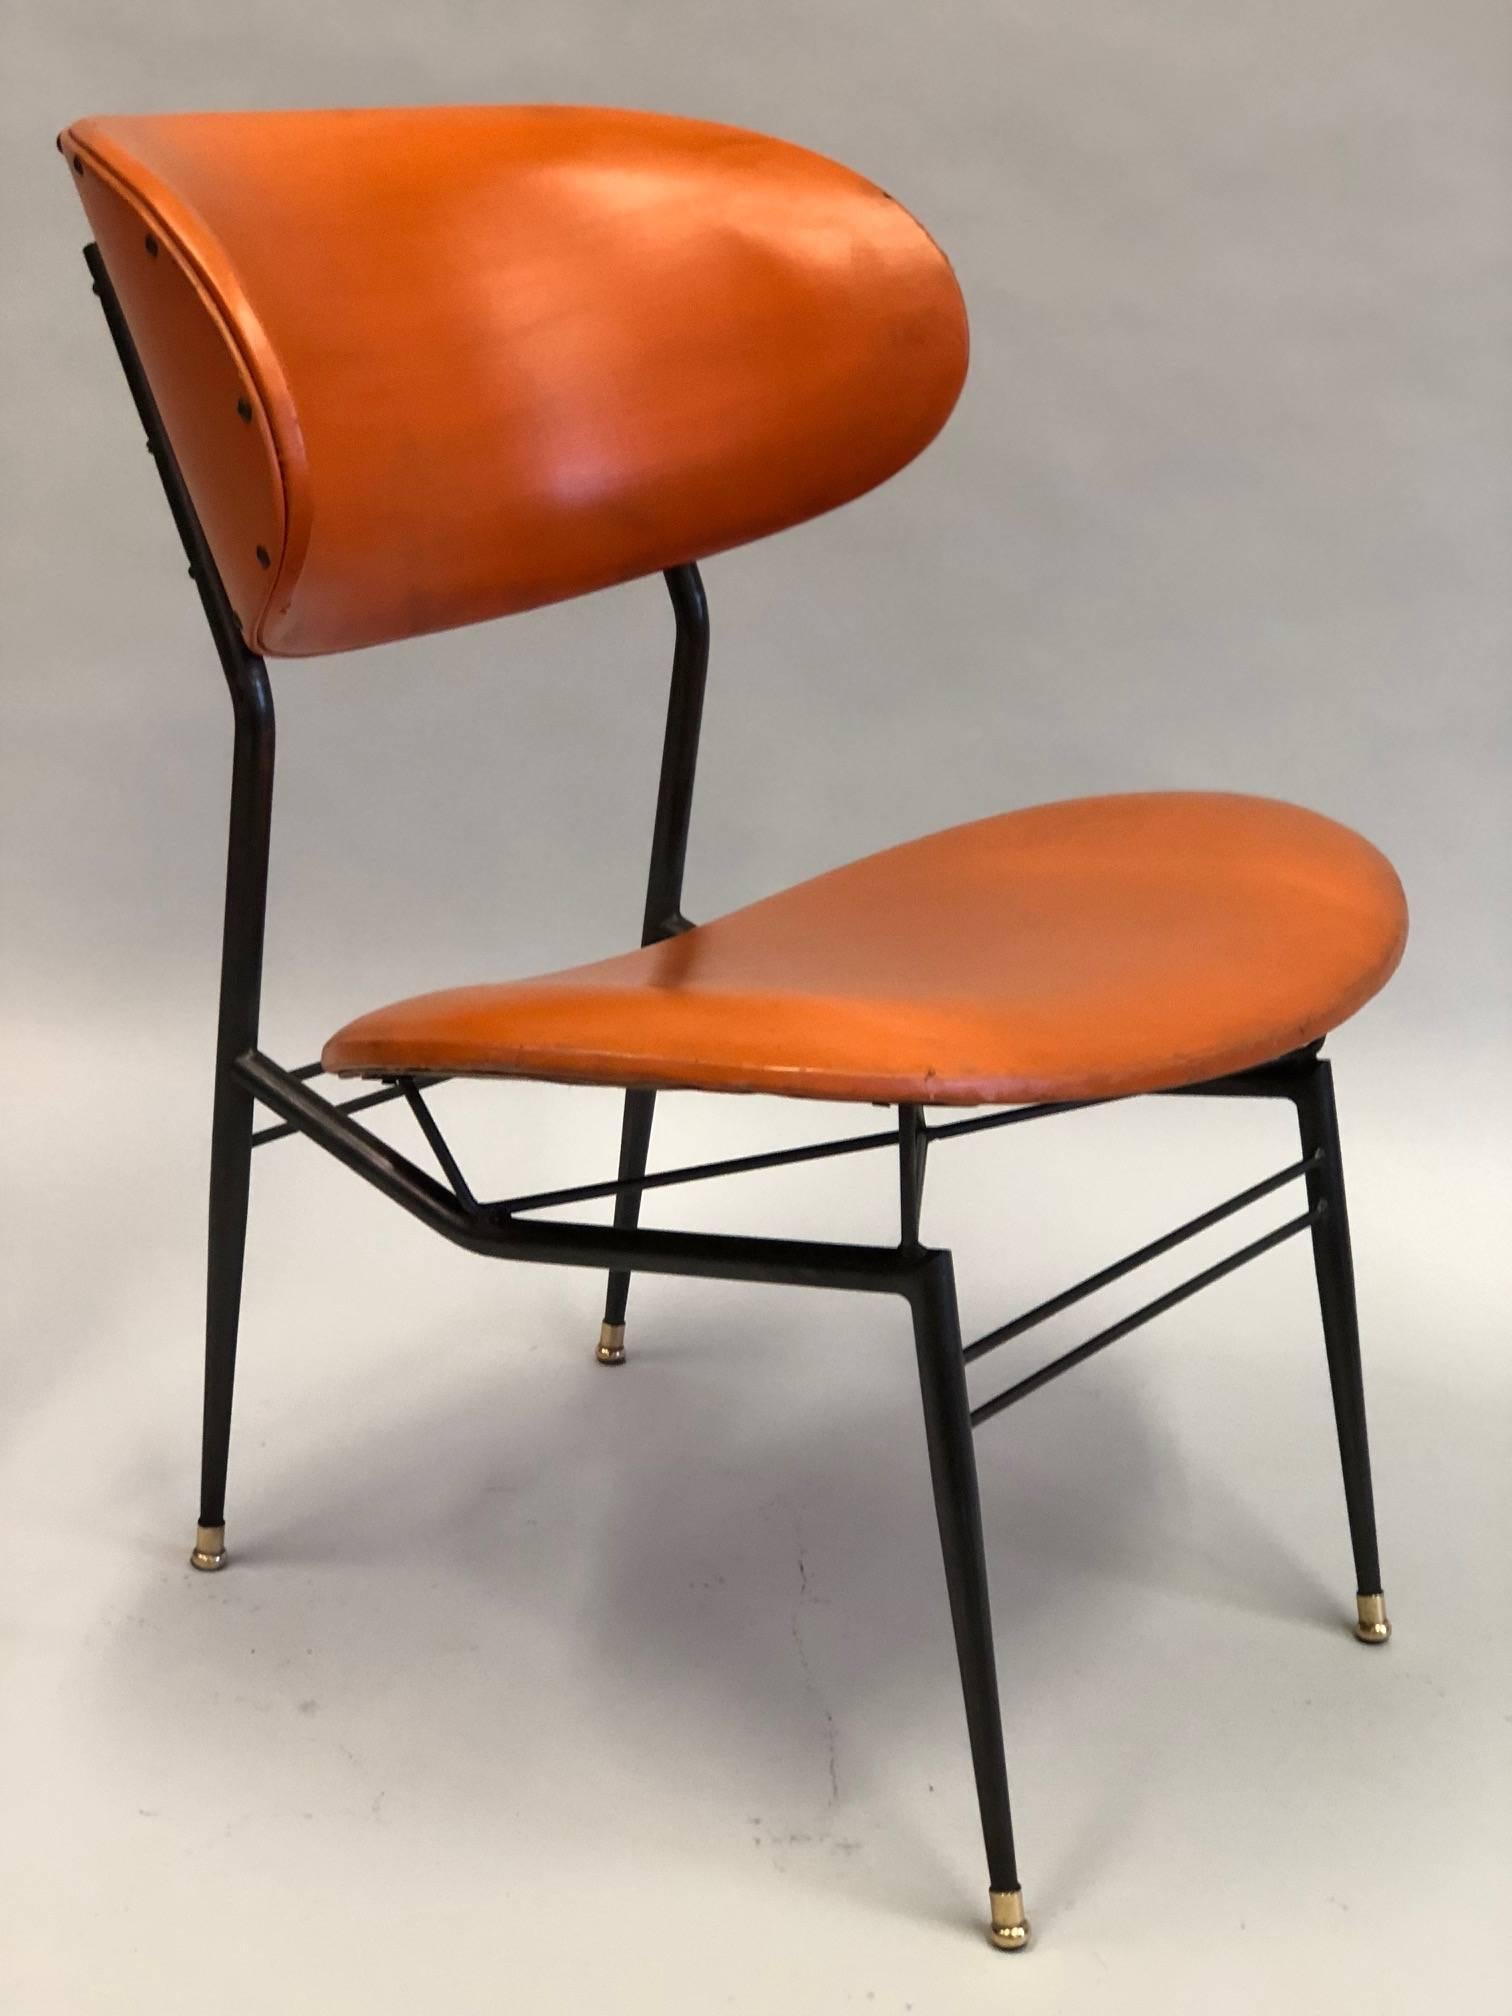 Two Pairs of Italian Mid-Century Modern Lounge Chairs by Gastone Rinaldi In Good Condition For Sale In New York, NY